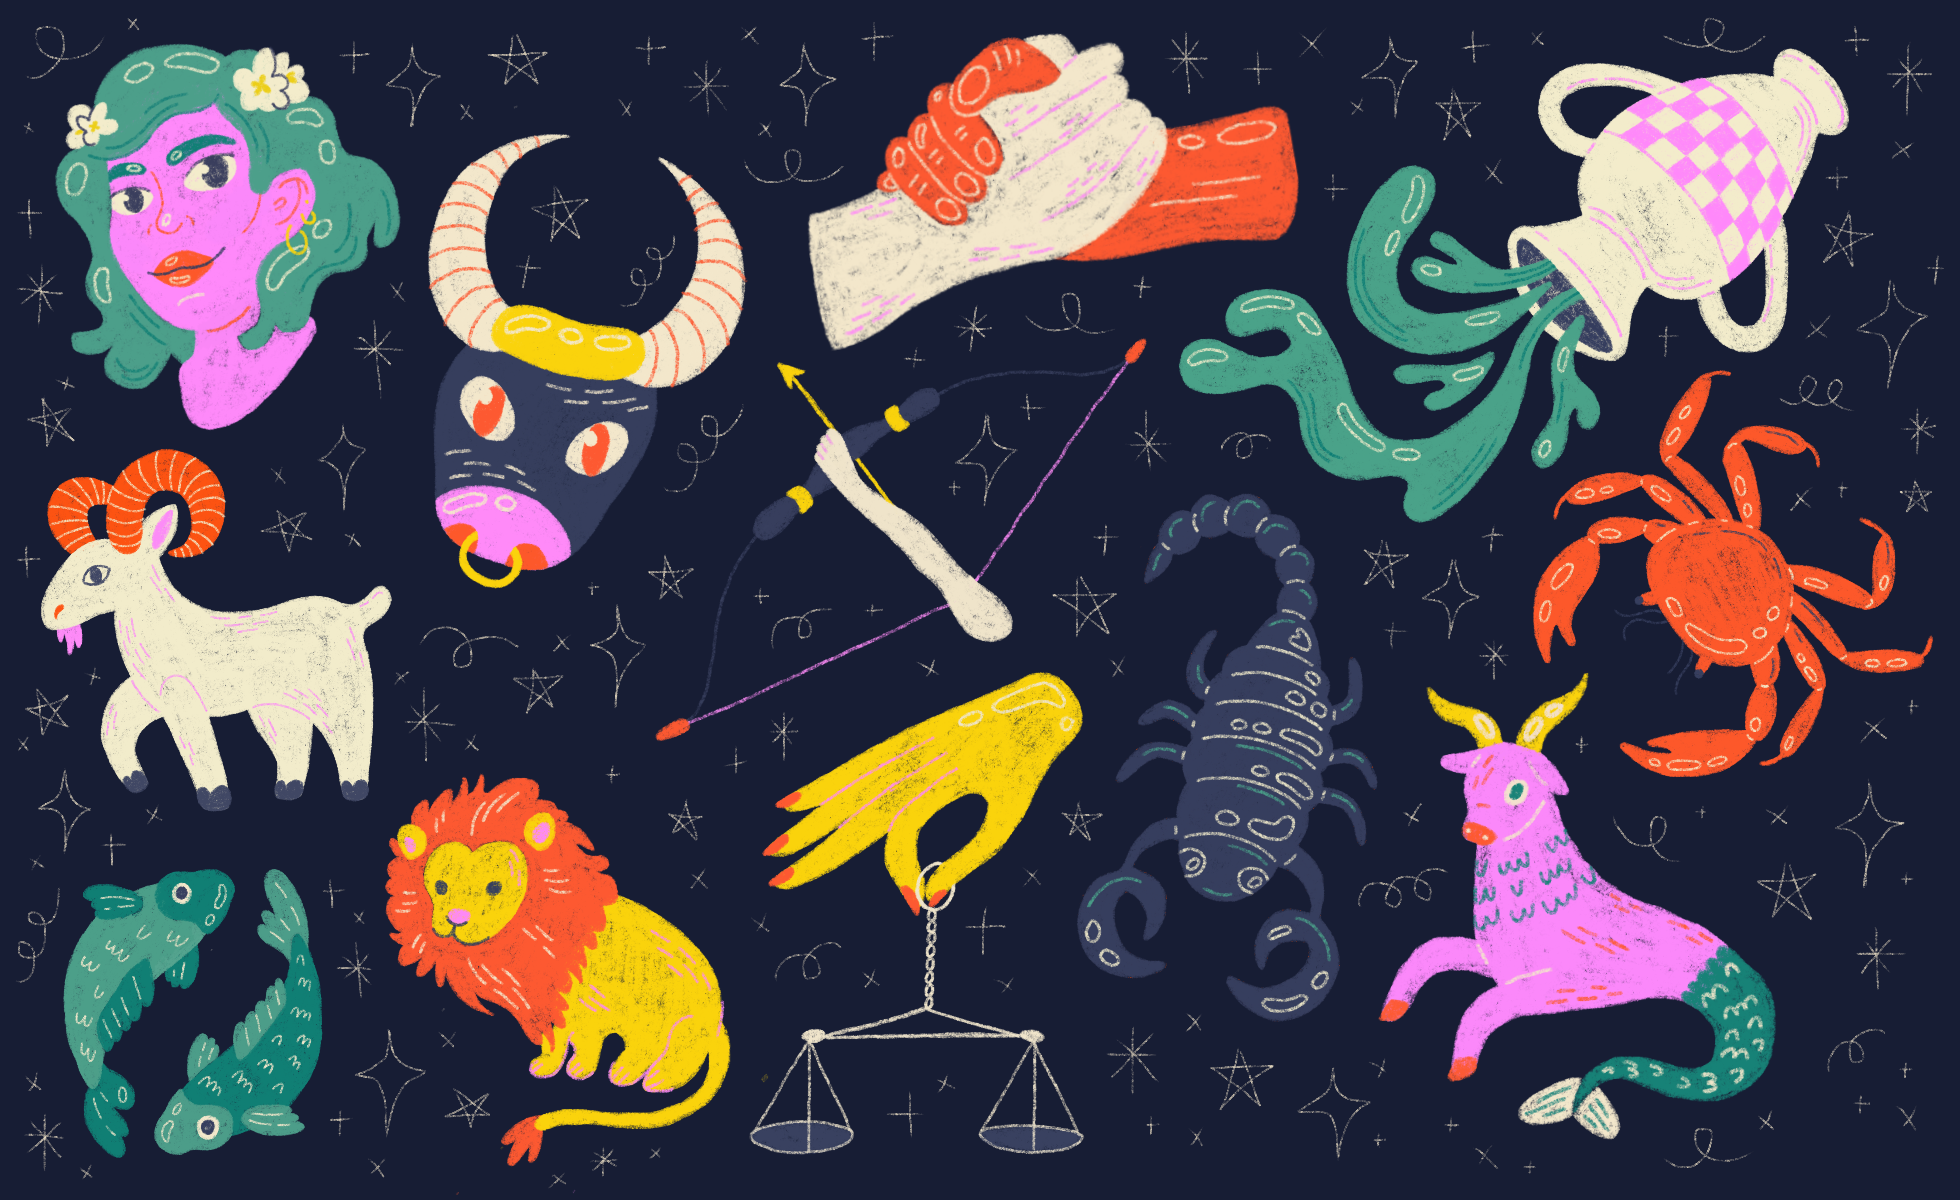 Best Holiday Gifts for Your Friends Based on Zodiac Sign | LaptrinhX / News